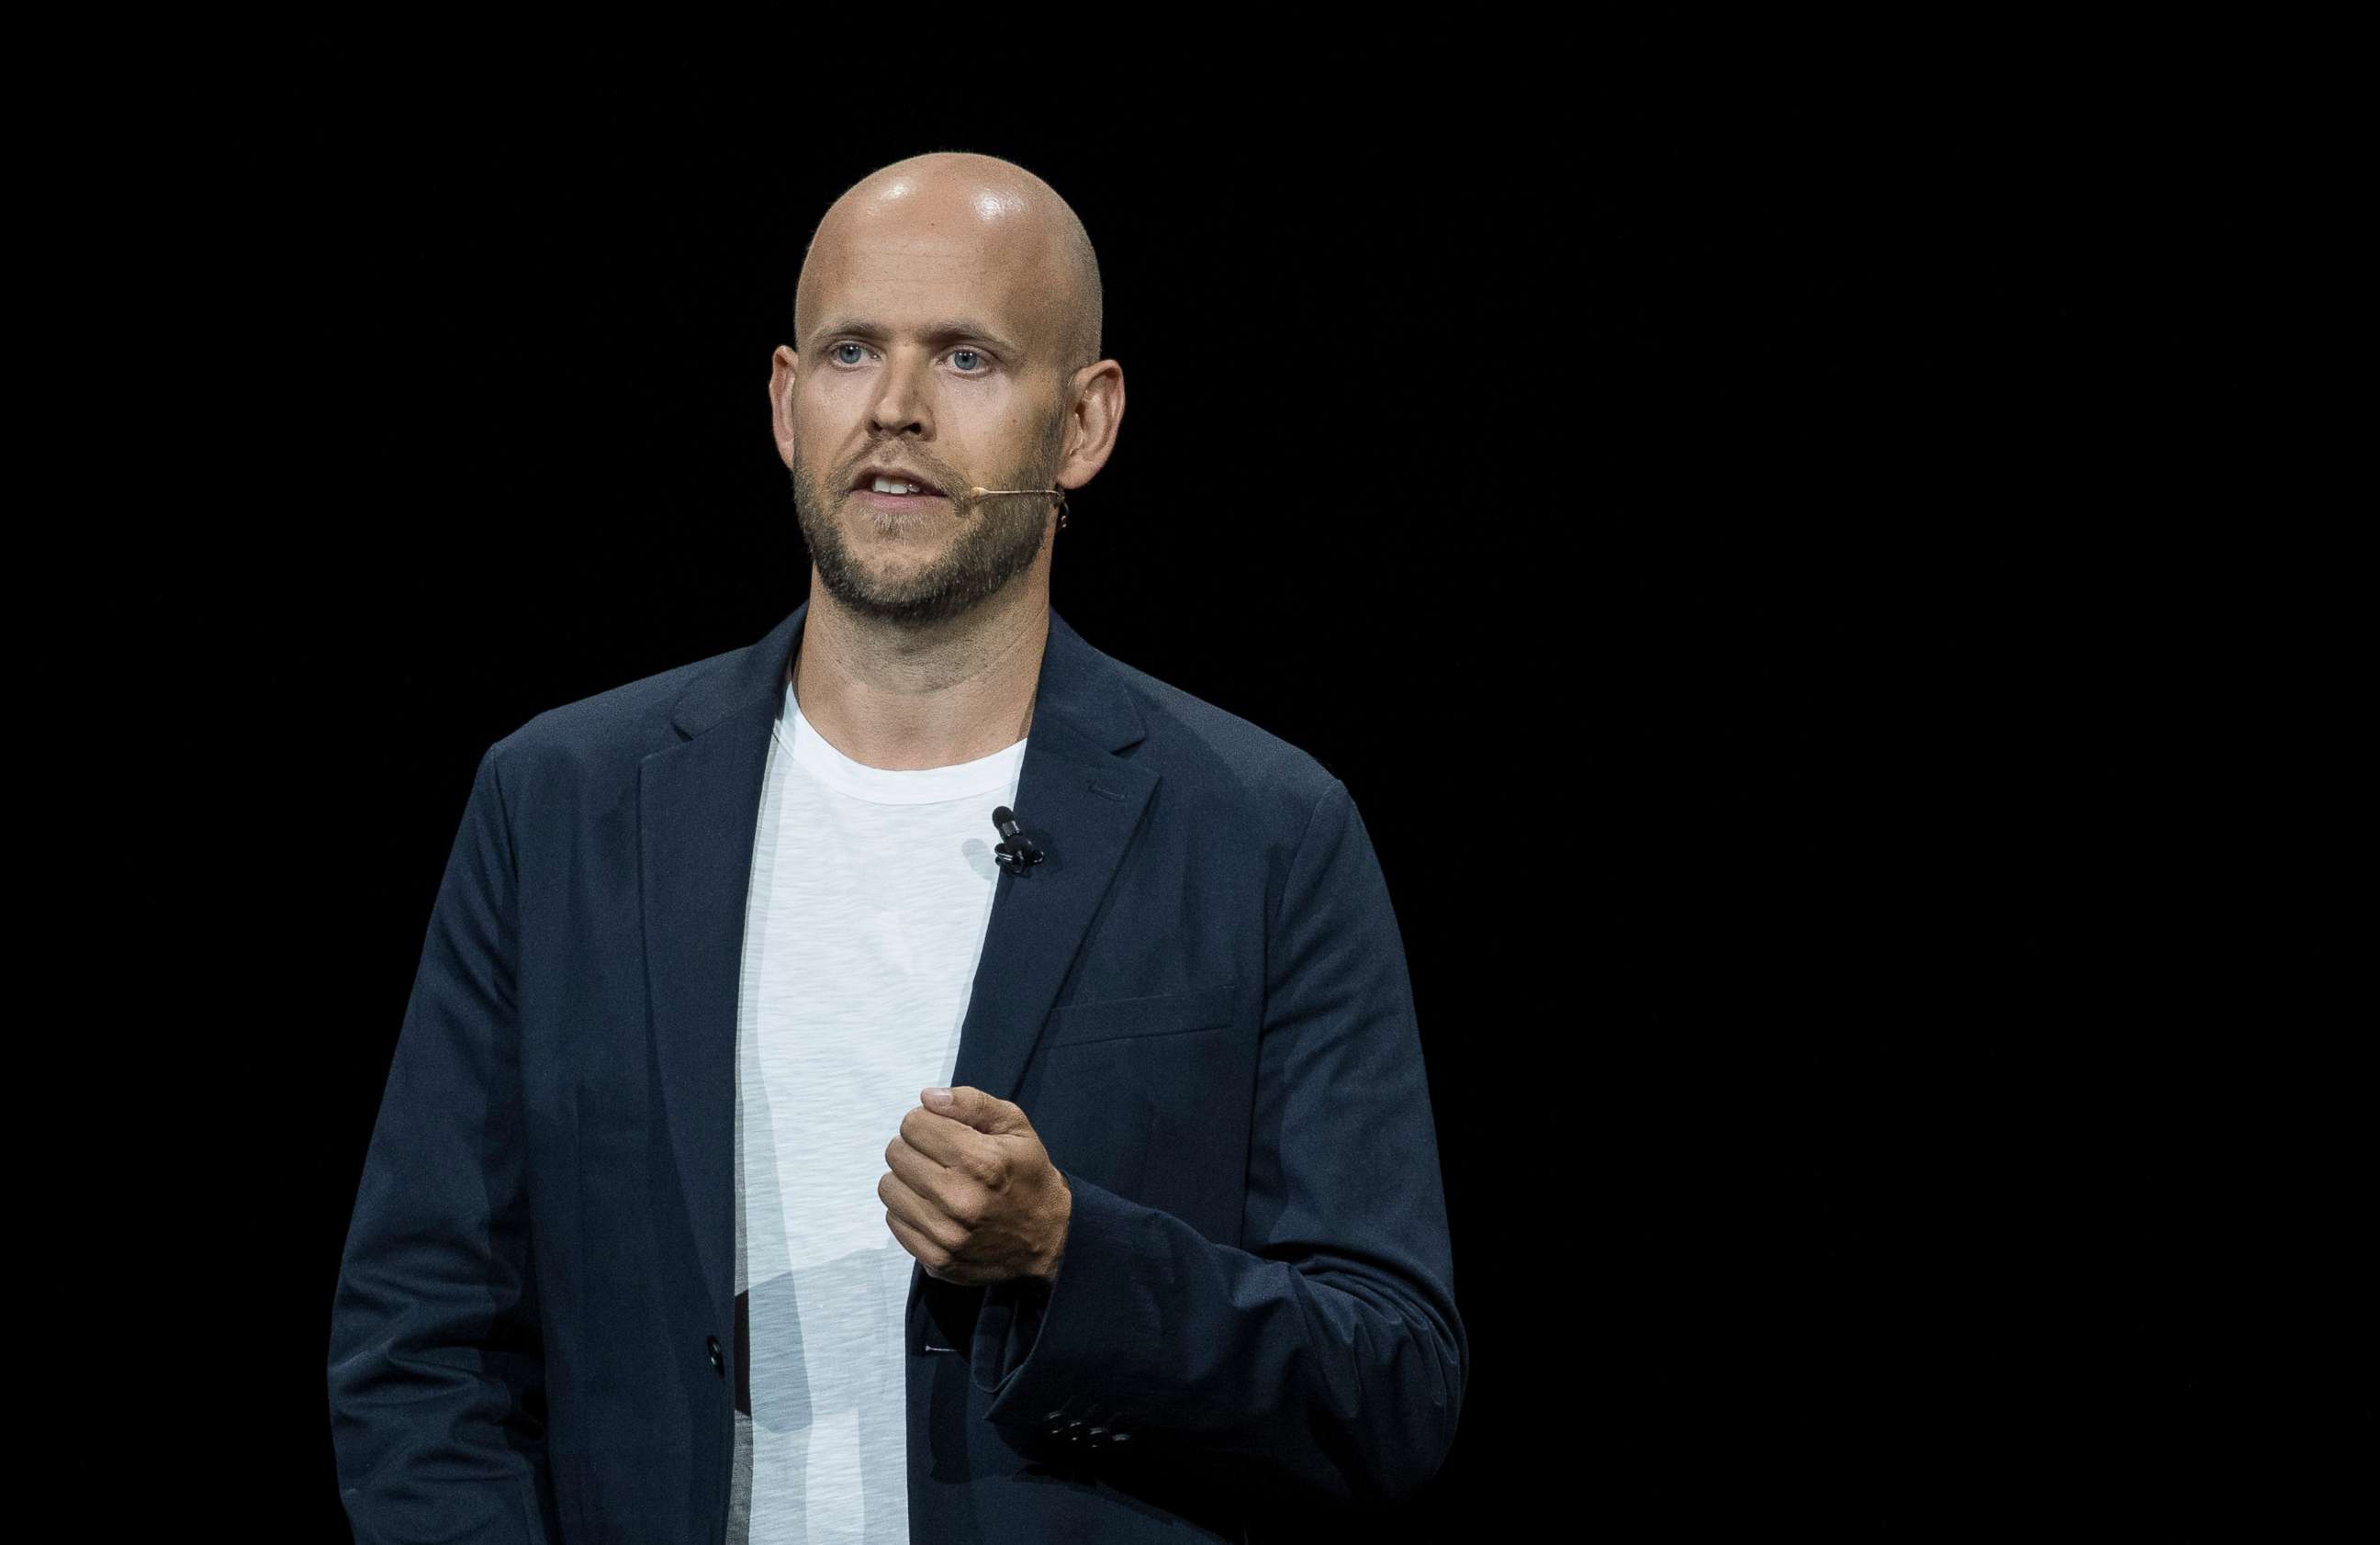 PHOTO: Daniel Ek, chief executive officer of Spotify, speaks at a product launch at the Barclays Center, Aug. 9, 2018, in the Brooklyn, New York.